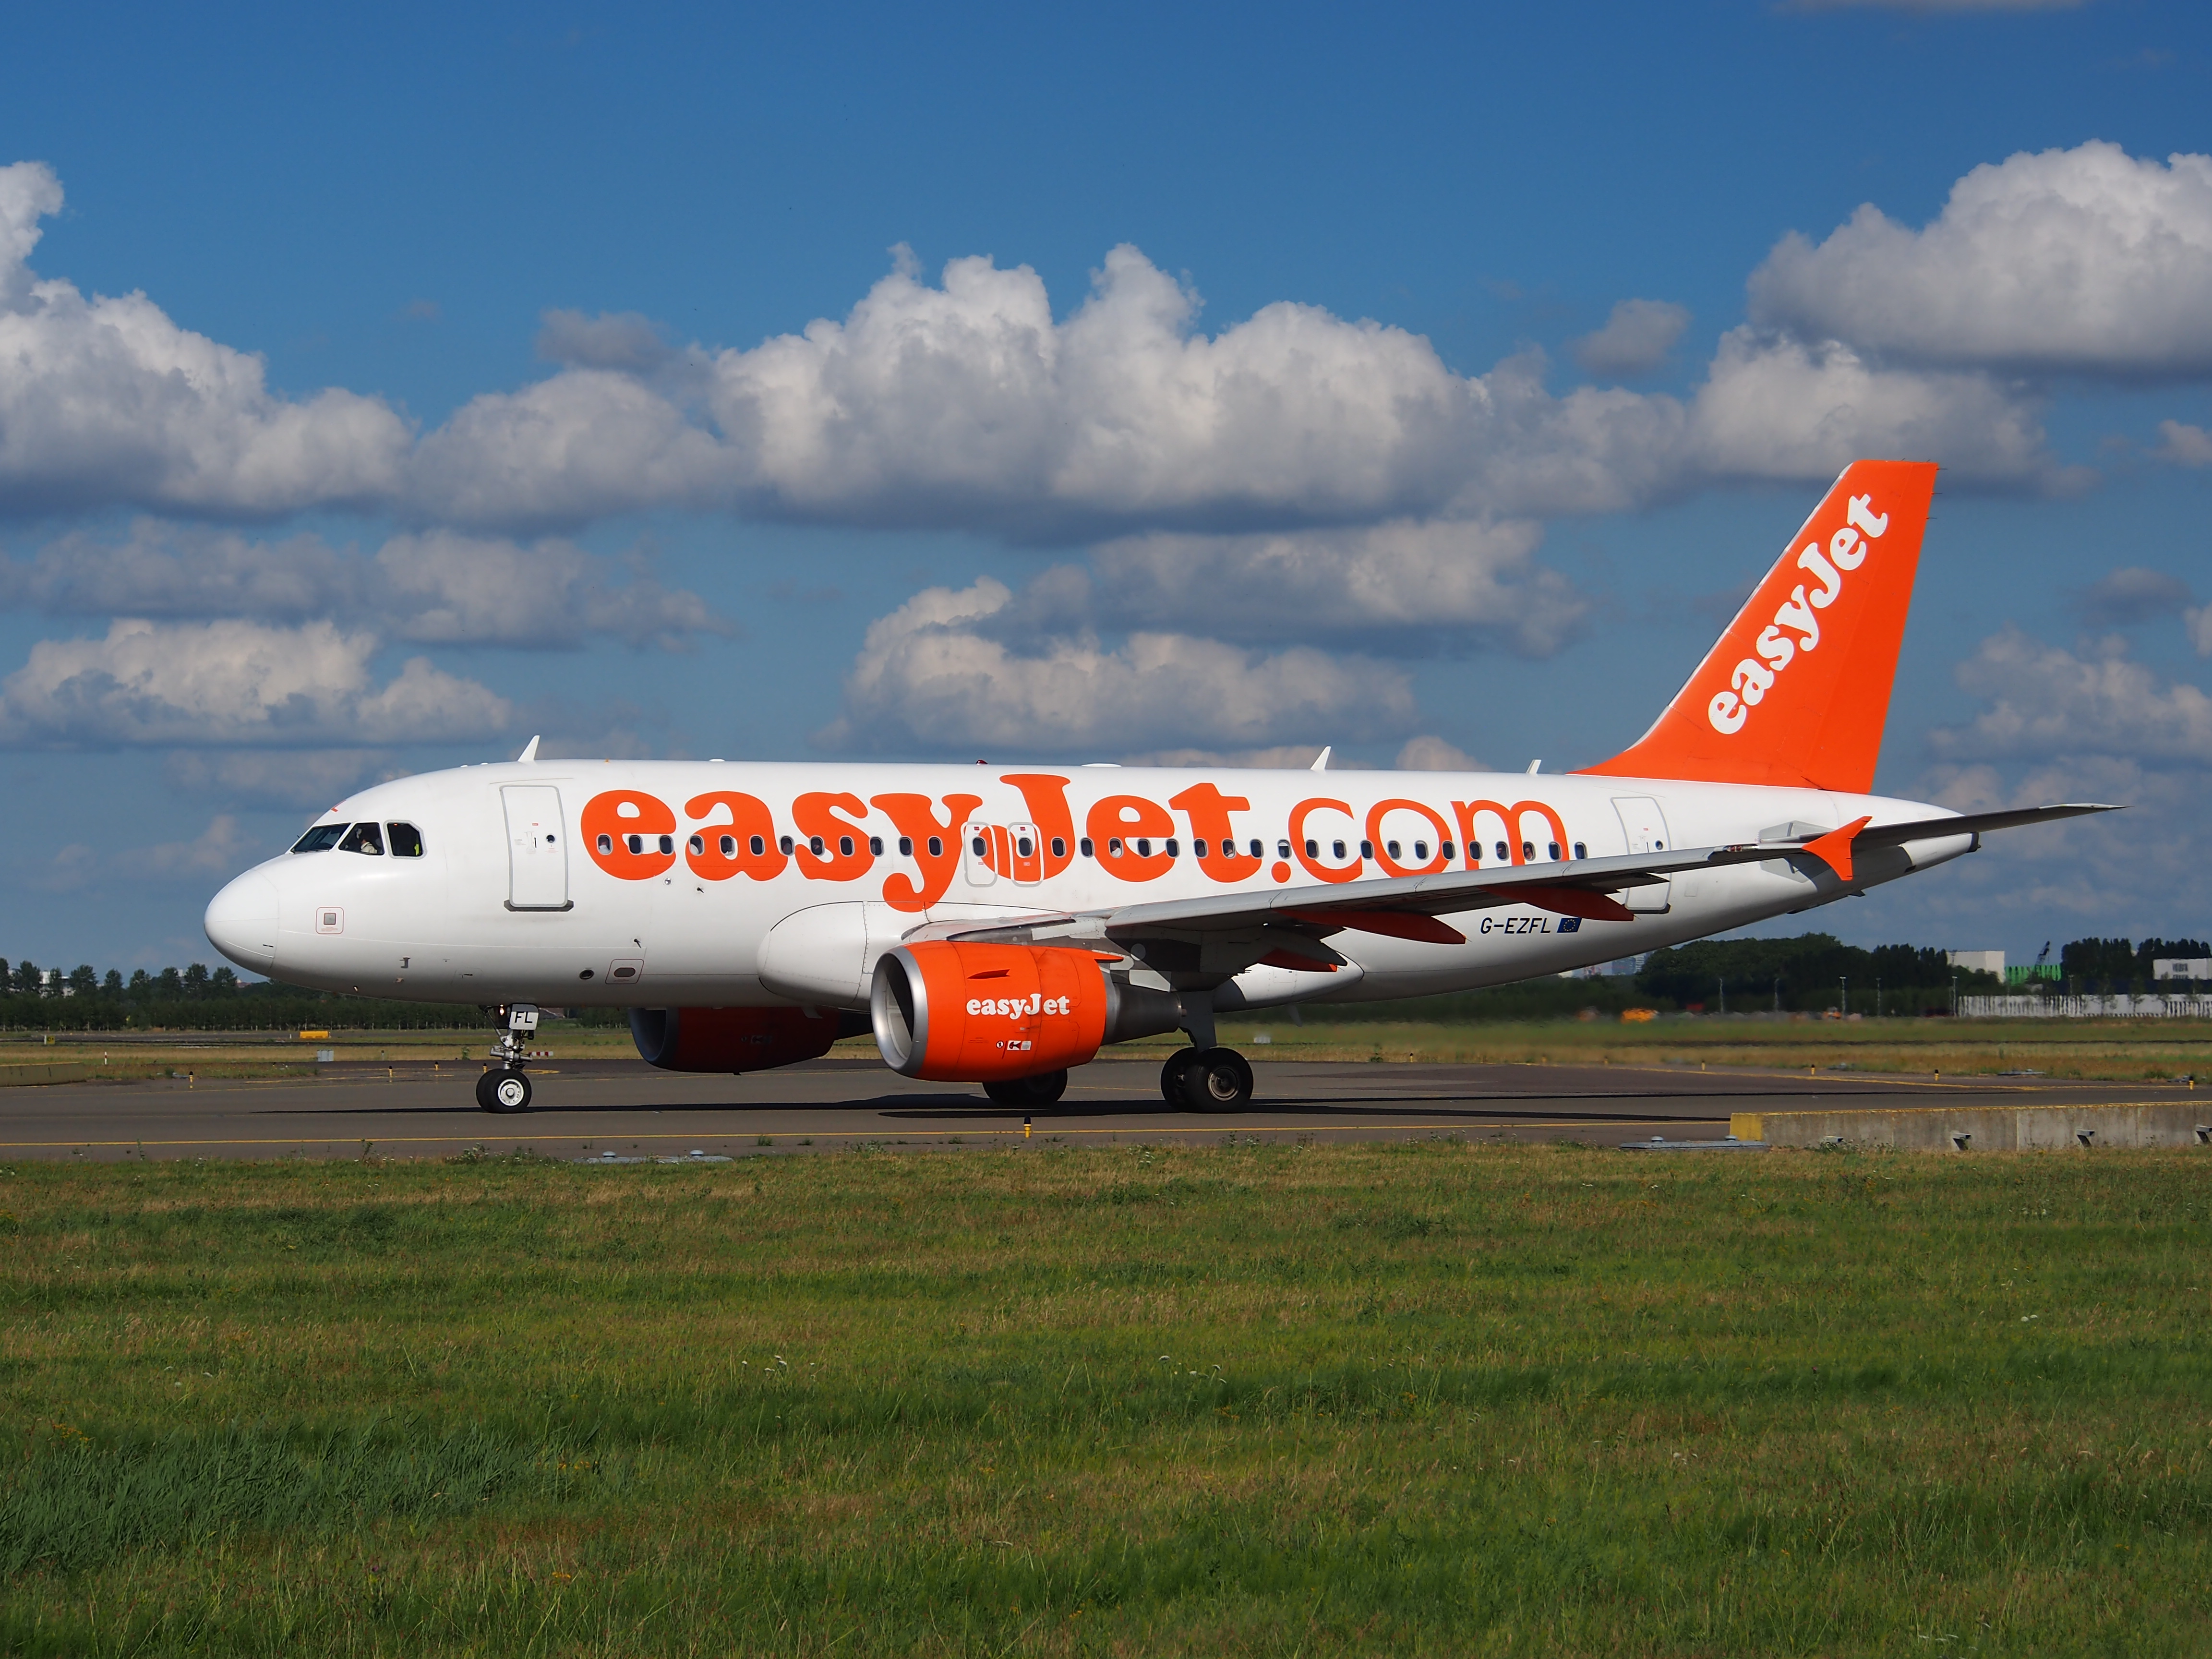 G-EZFL easyJet Airbus A319-111 - cn 4056 taxiing, 25august2013 pic-002